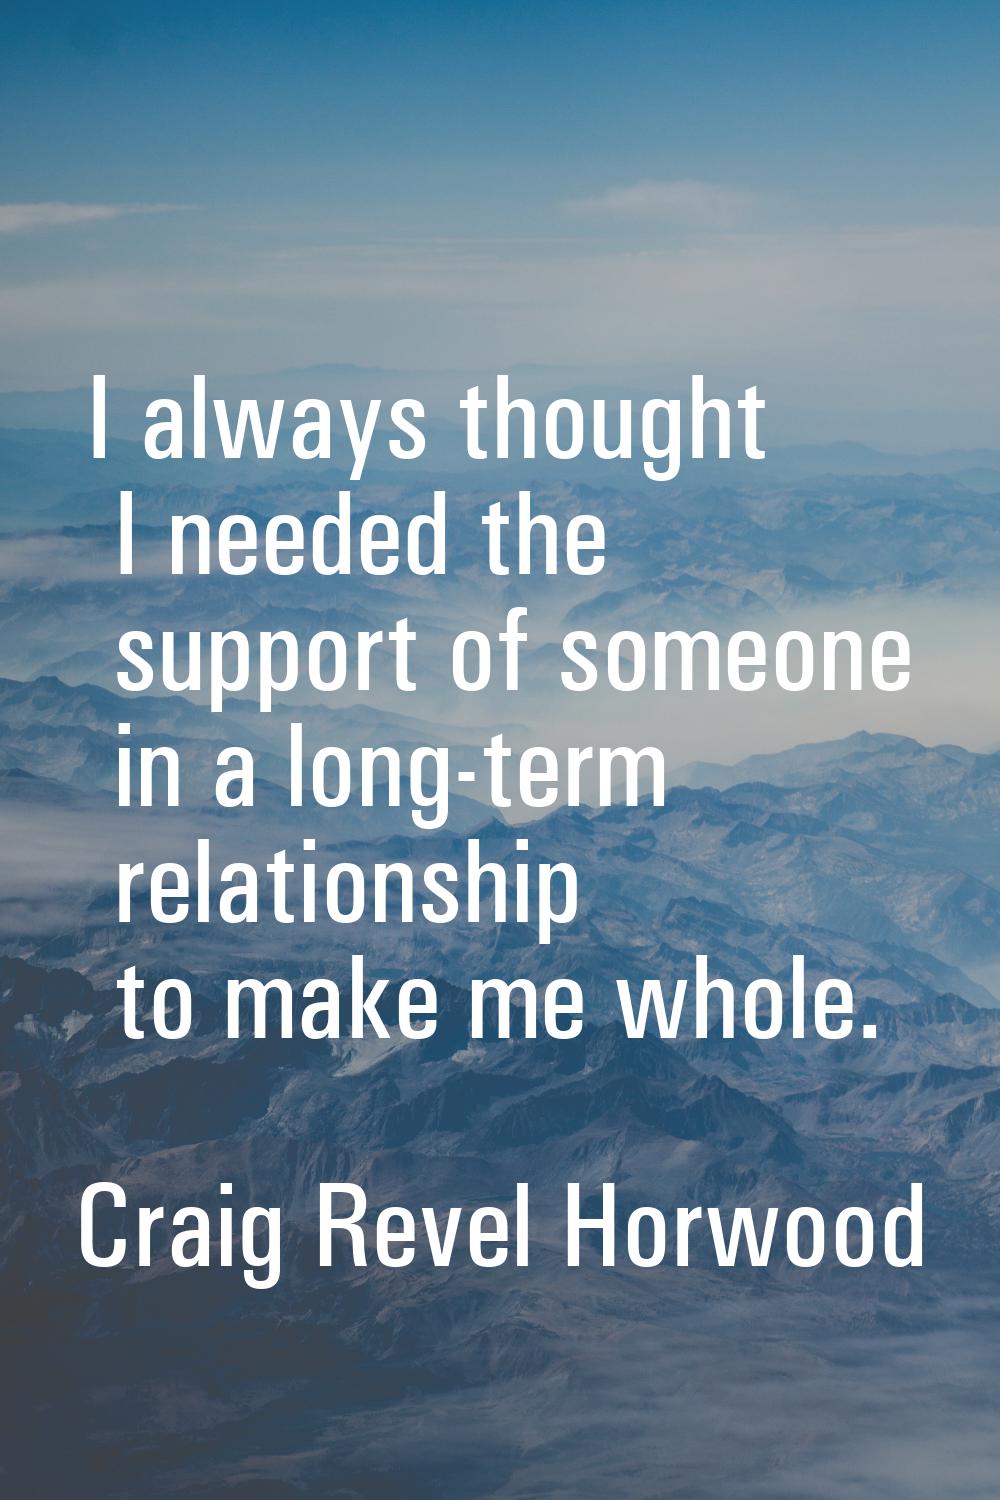 I always thought I needed the support of someone in a long-term relationship to make me whole.